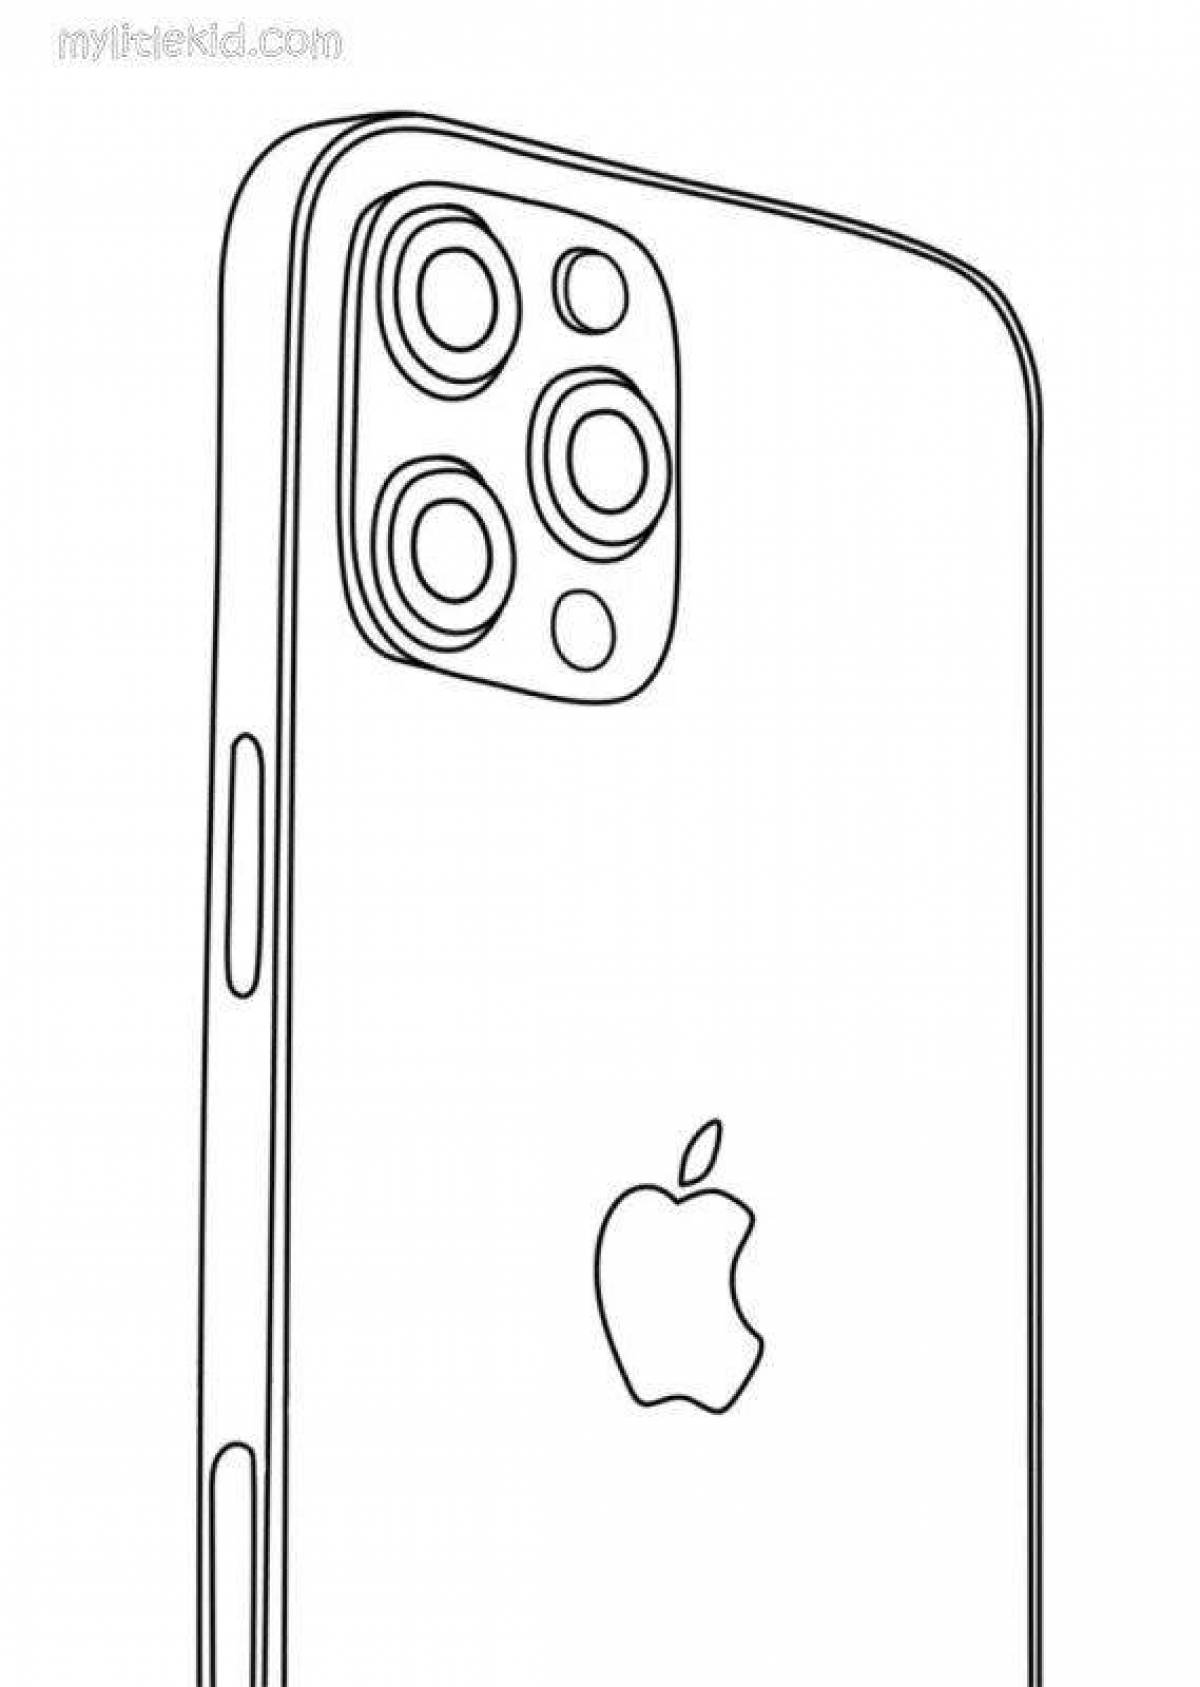 Colorful high school iphone coloring page